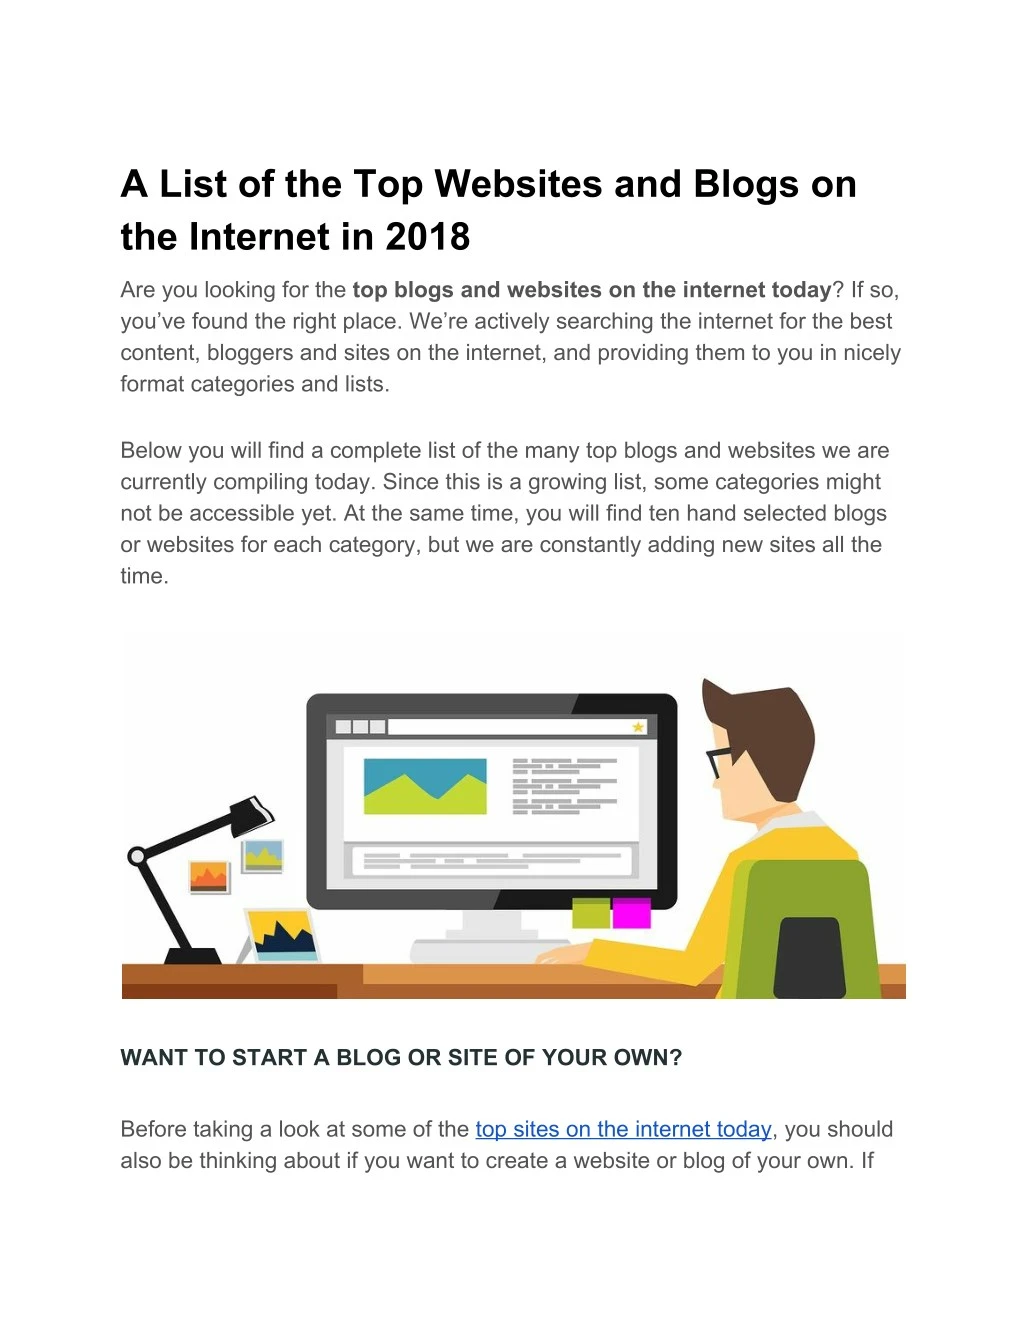 a list of the top websites and blogs